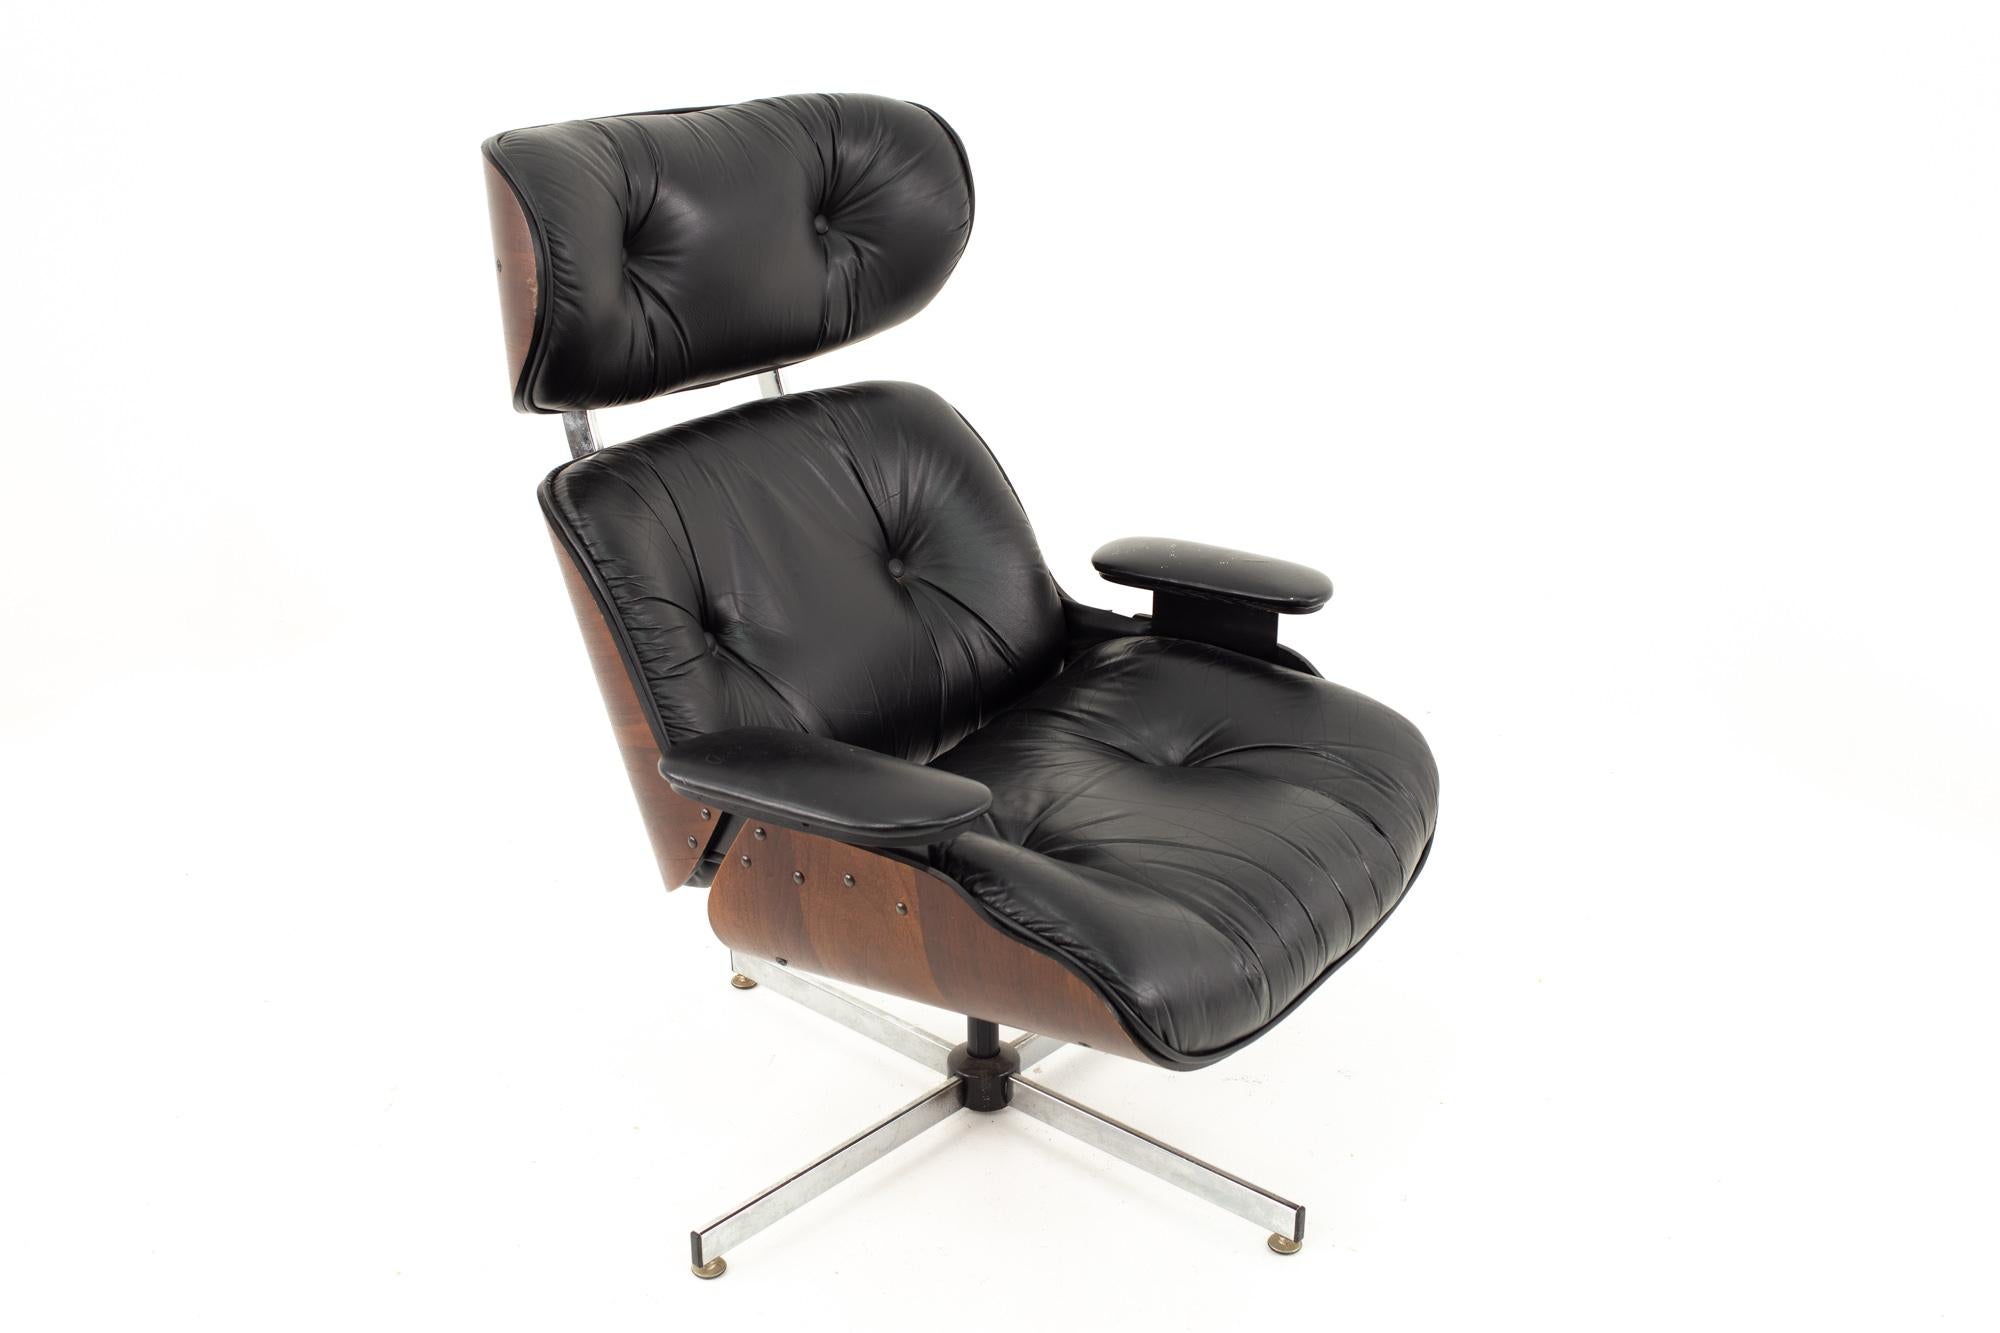 plycraft lounge chair vs eames